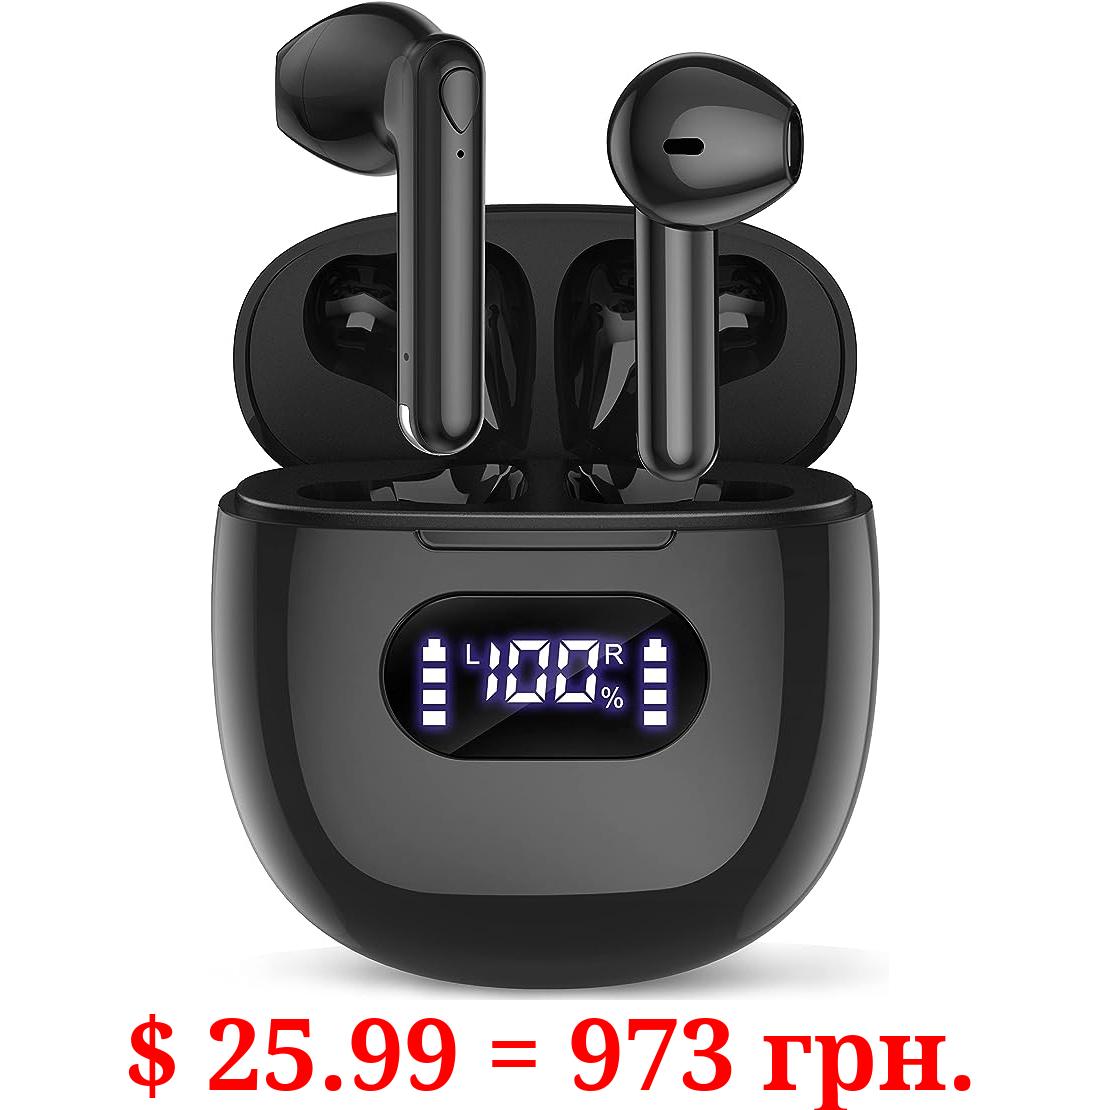 Wireless Earbuds, Bluetooth Headphones V5.3 Wireless Earphones, 48H Playtime LED Power Display & Wireless Charging Case, HiFi Stereo Bass IPX7 Waterproof Ear Buds Built-in Mic for Workout Office Black